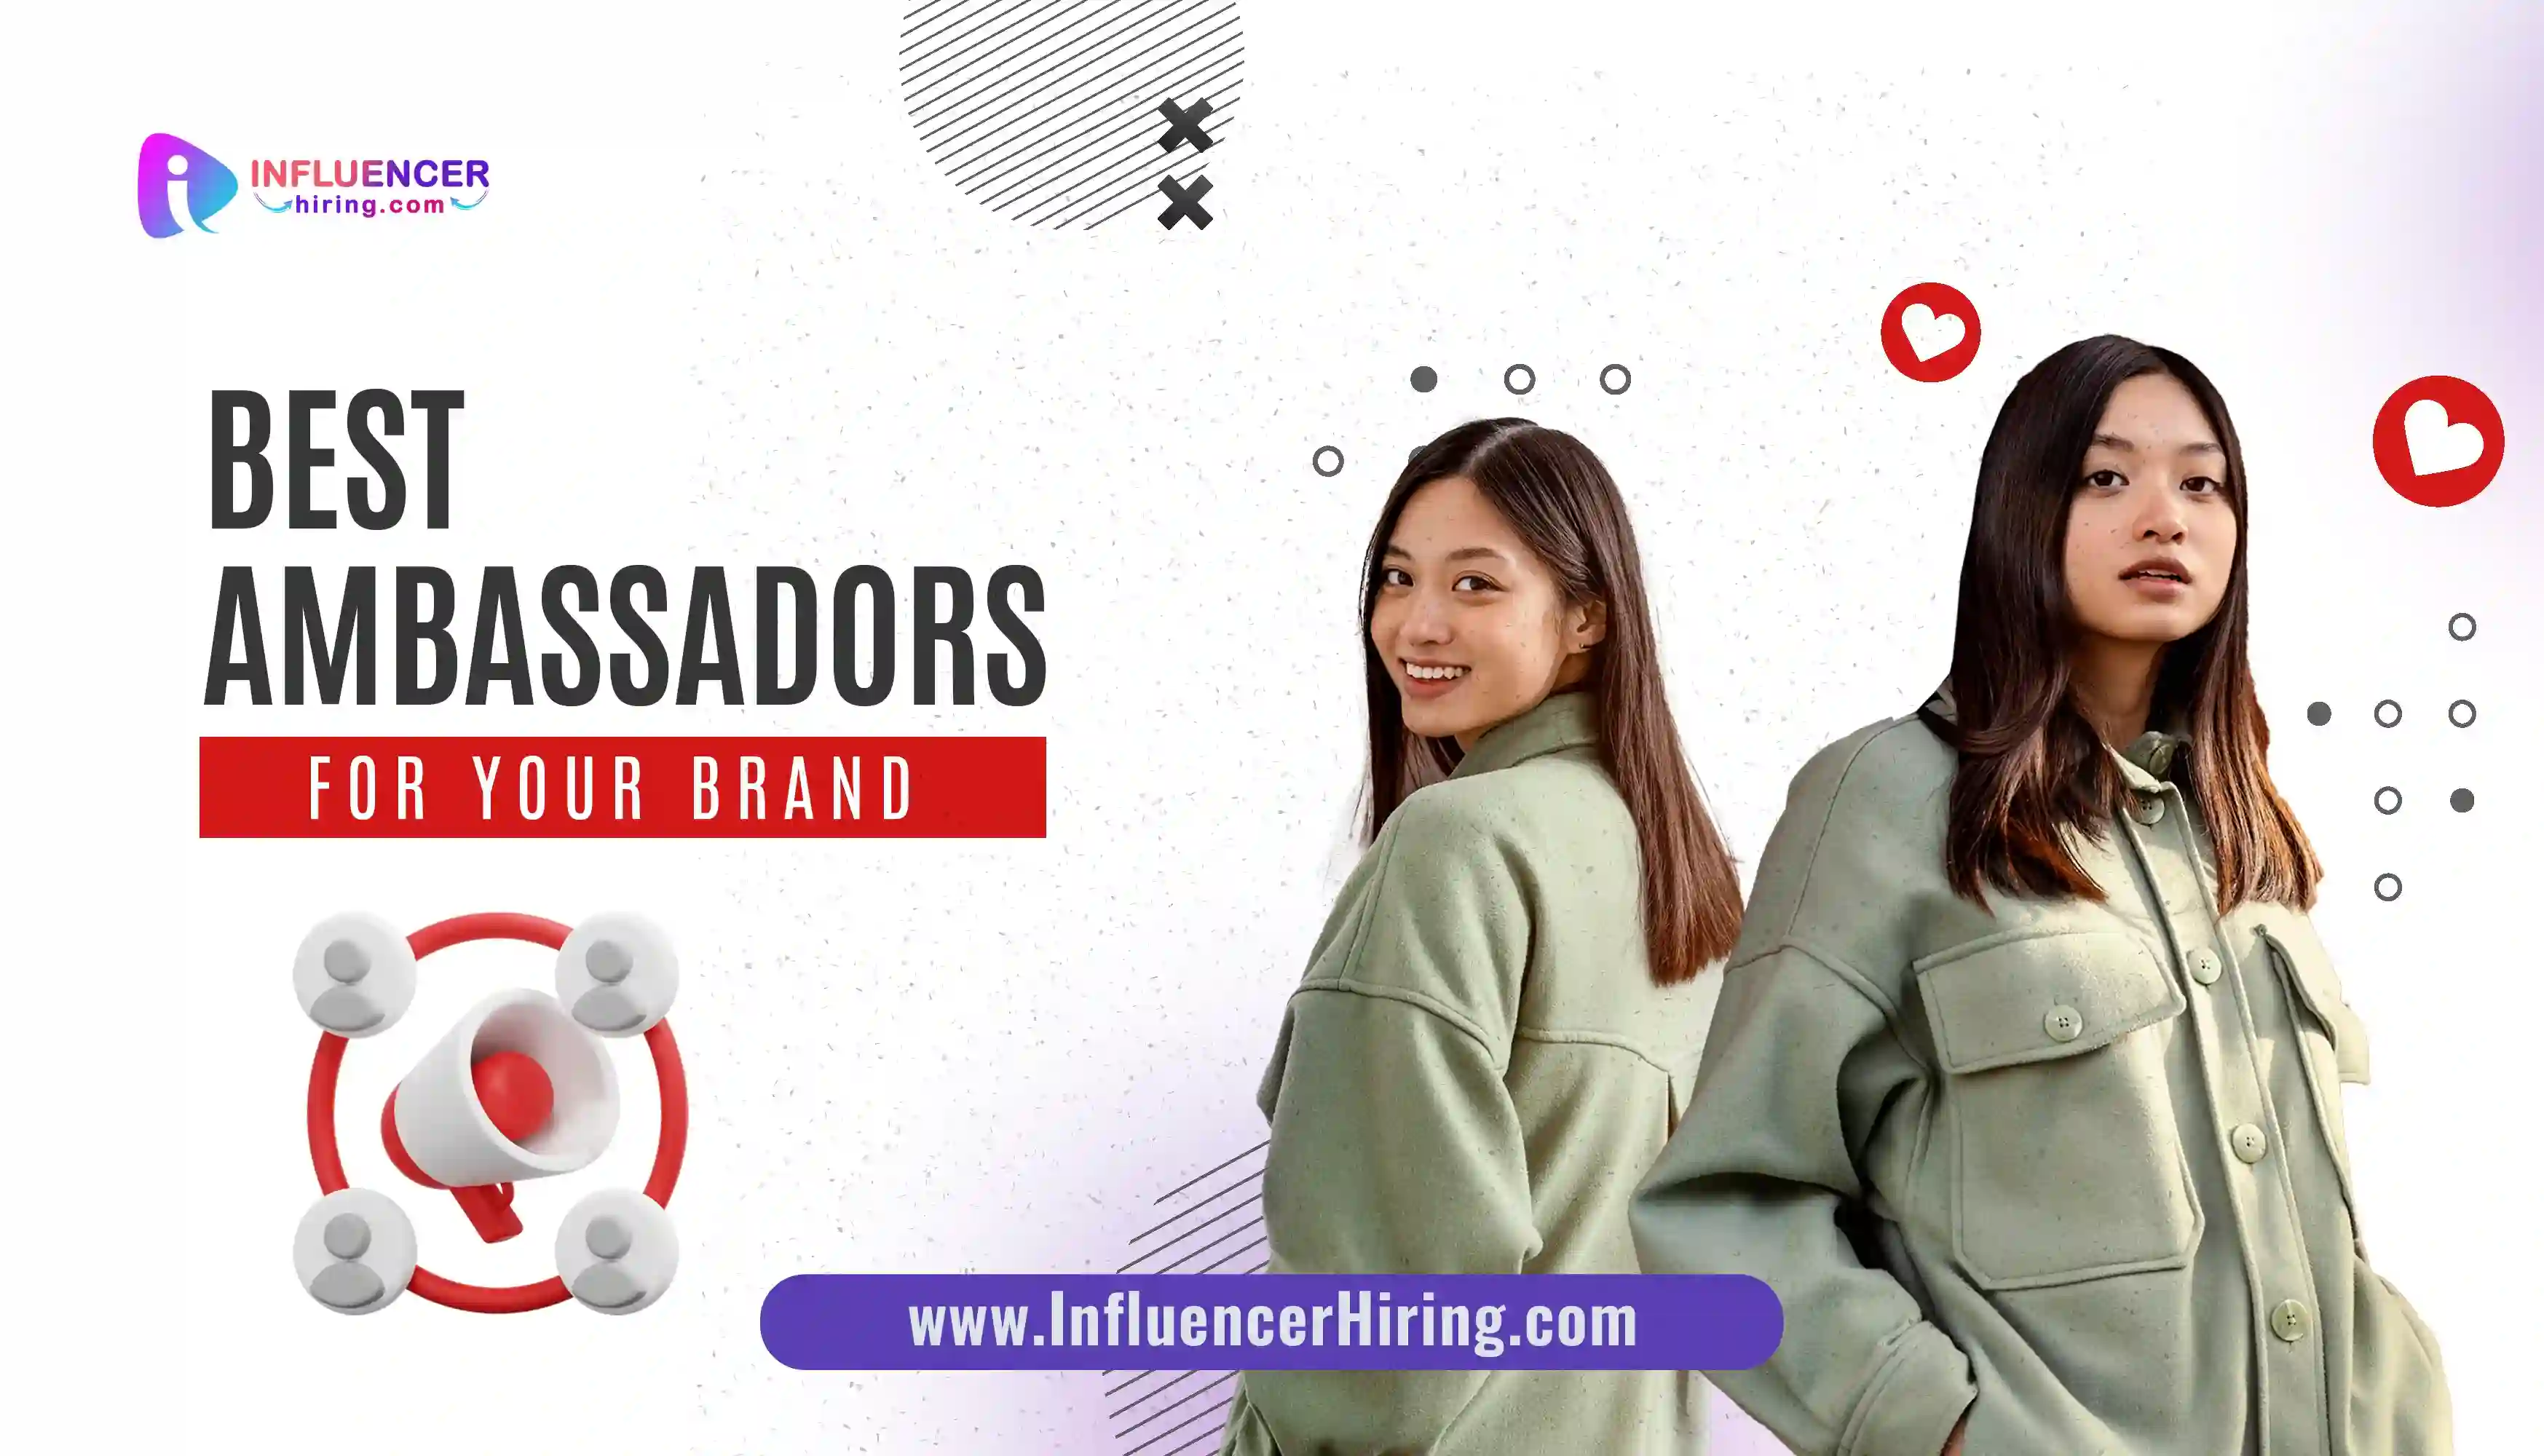 003_What_makes_micro-influencers_the_best_ambassadors_foryourbrand__HjBxUDN.webp